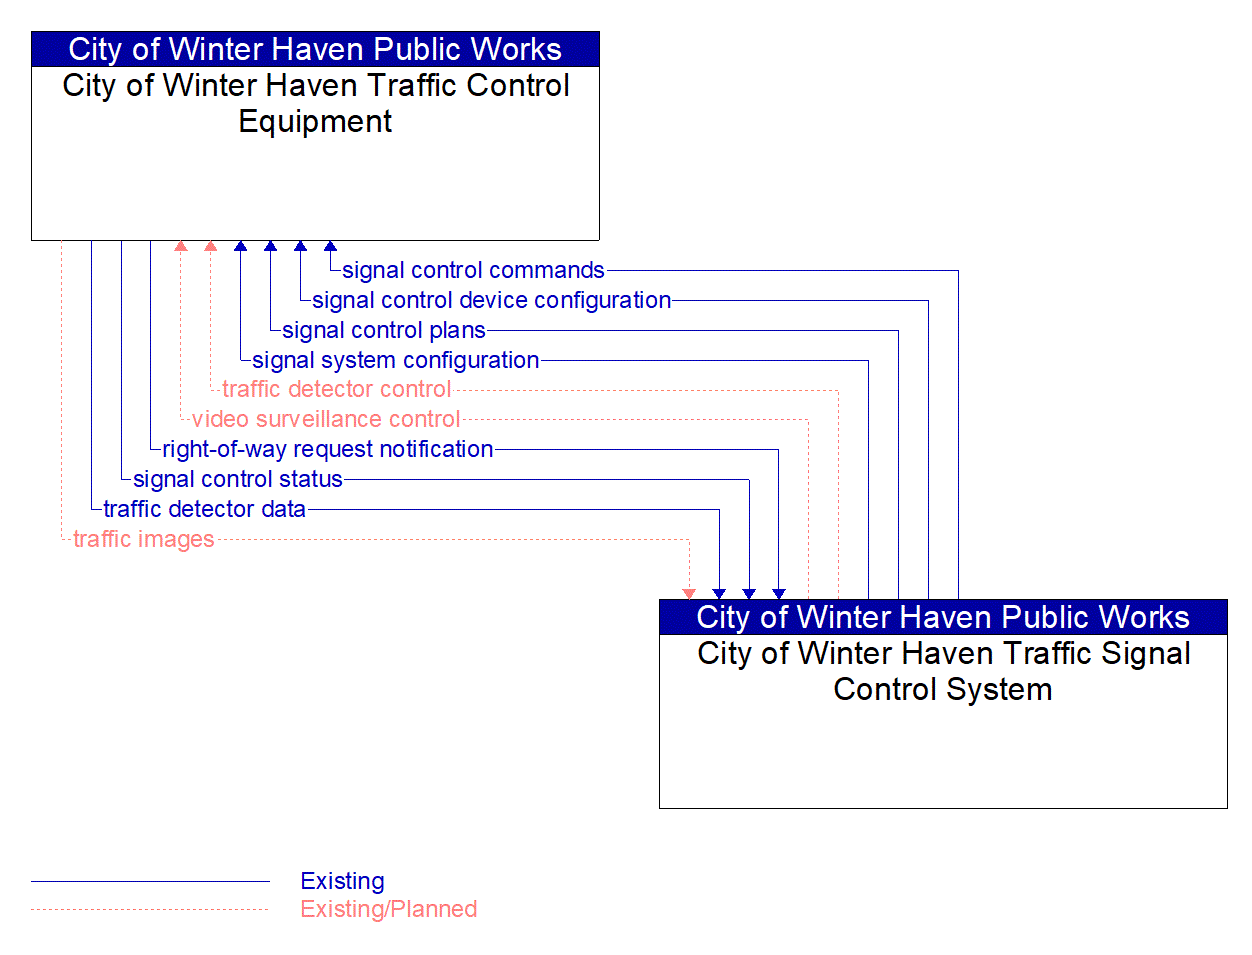 Service Graphic: Traffic Signal Control (City of Winter Haven)